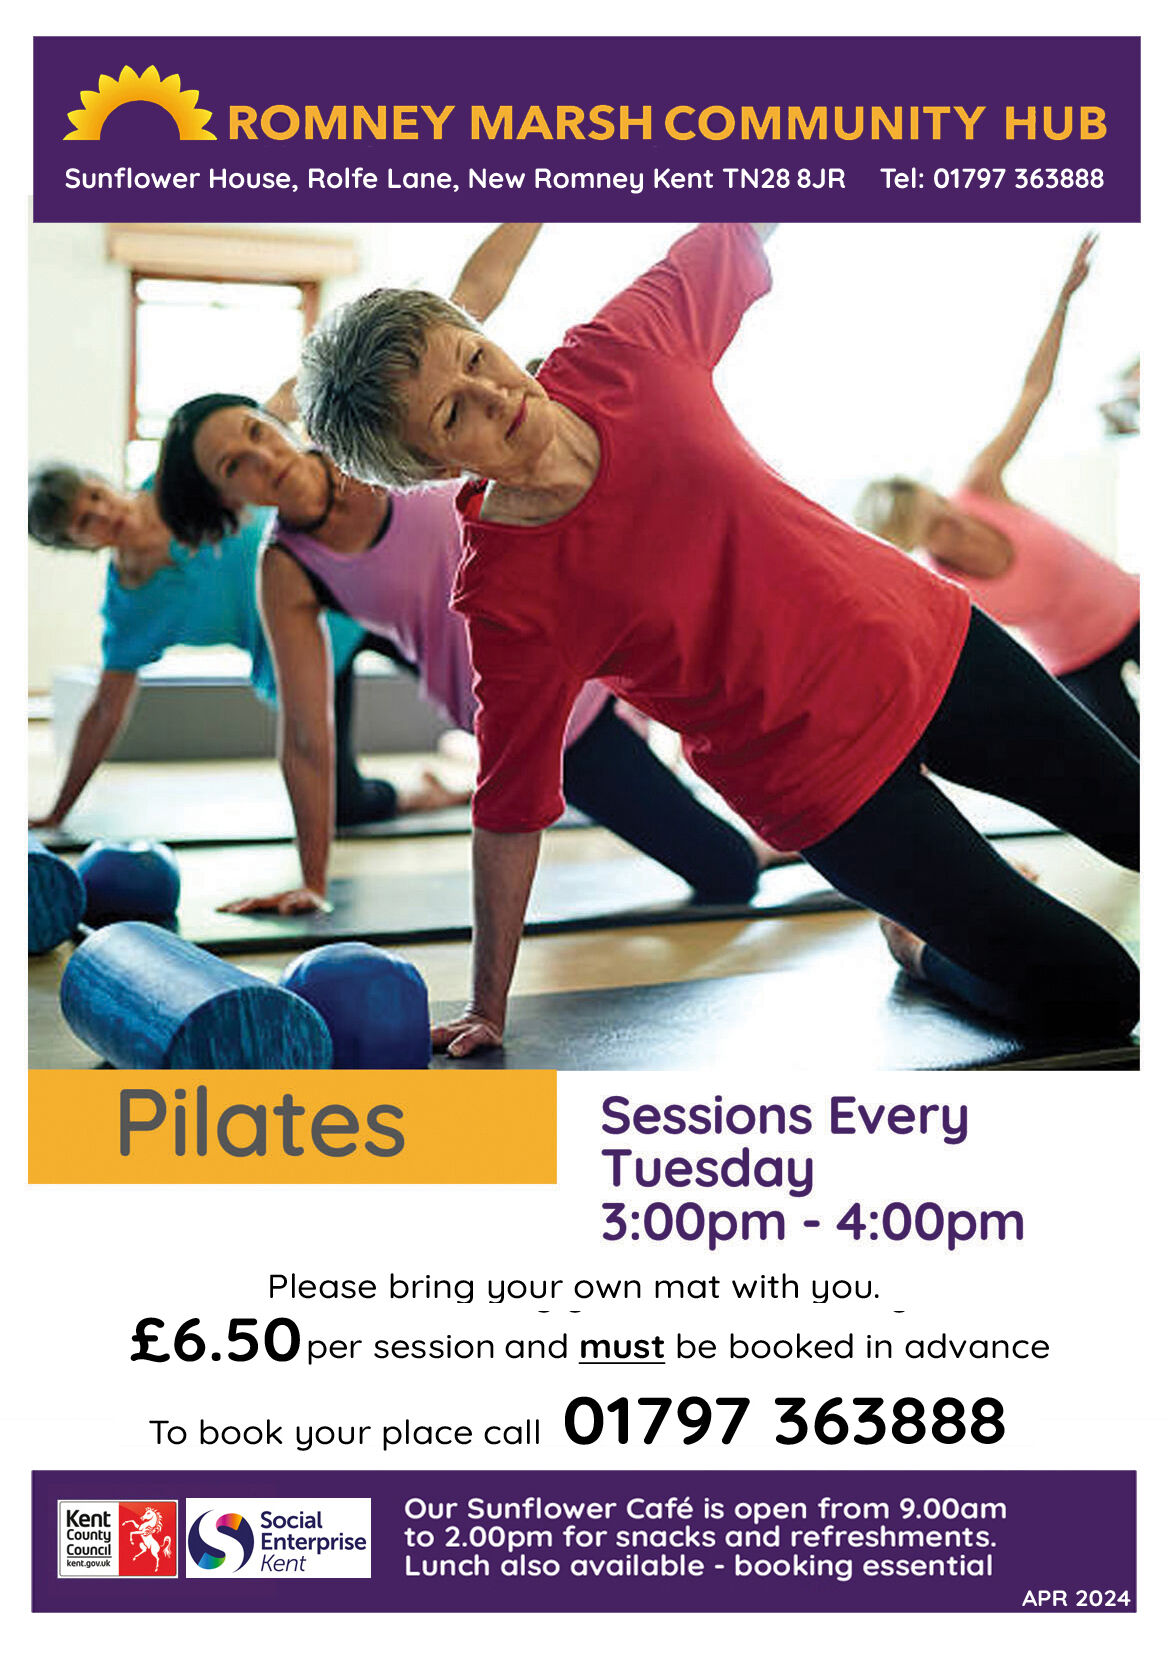 TUES PILATES with PAUL APR 2024 6 50